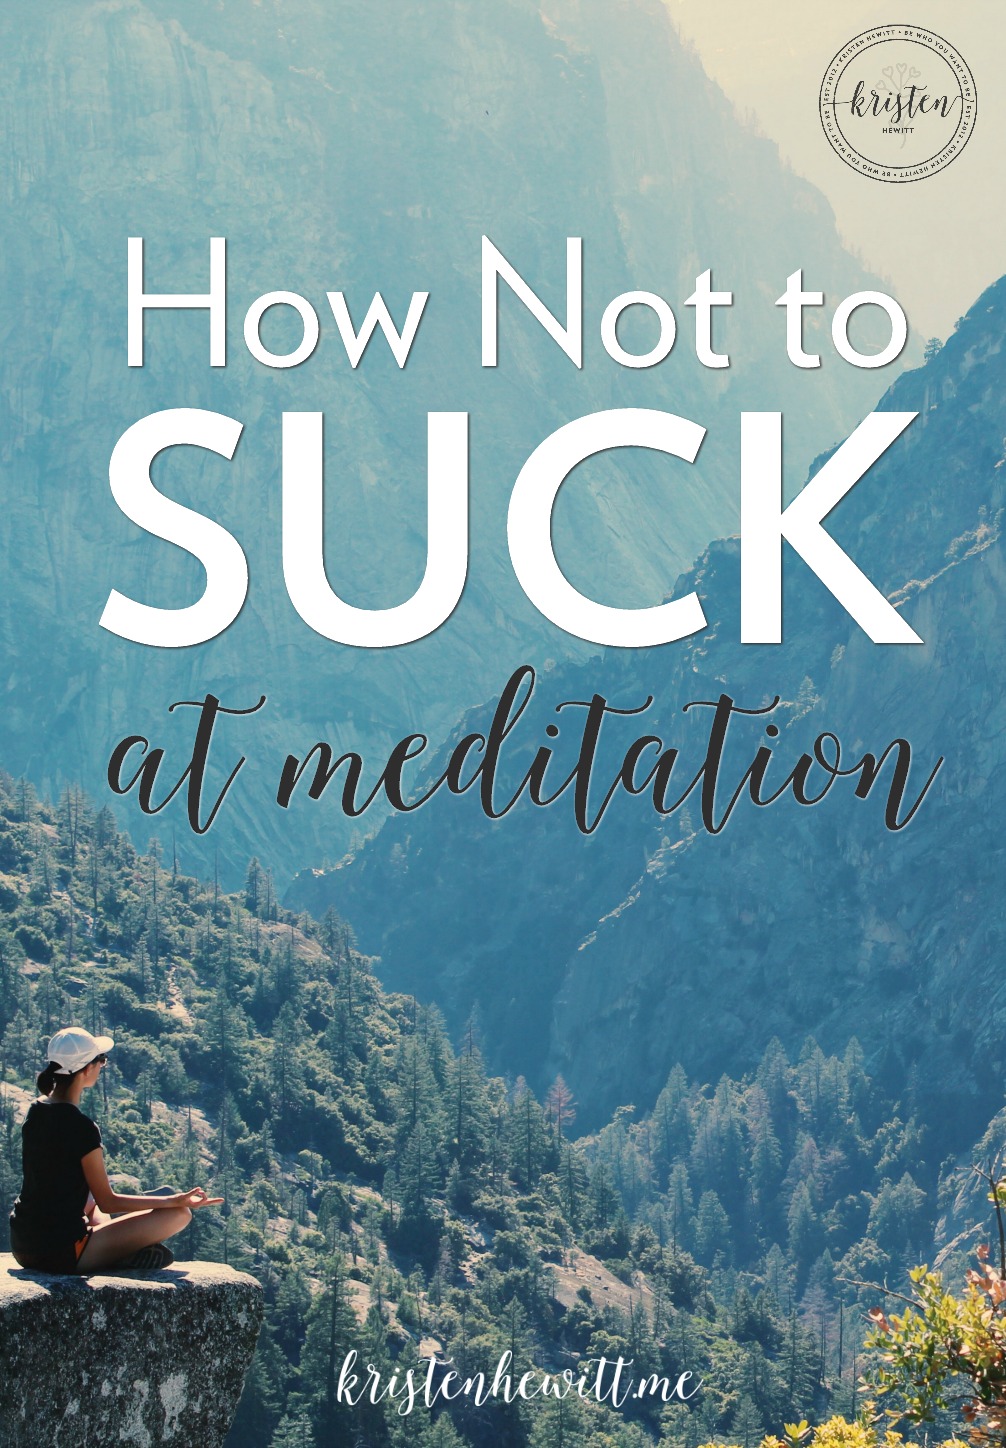 Have you heard the benefits of meditation but couldn't figure out how to disconnect? Here's how not to suck at meditation! You got this.